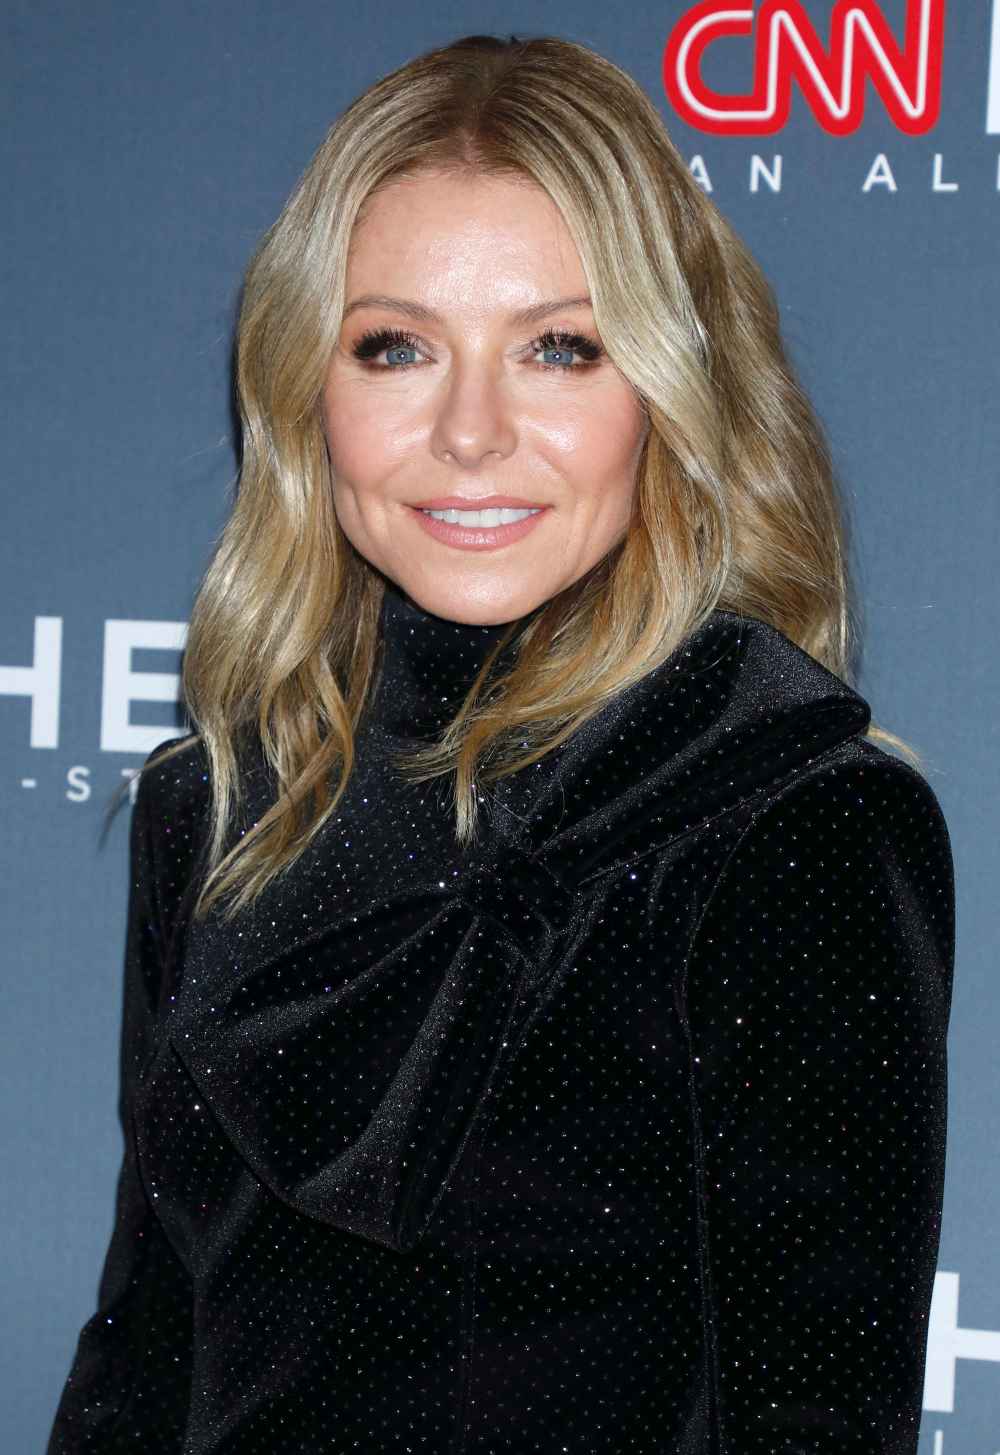 Kelly Ripa Daughter Lola Is Stressed Out About Finals